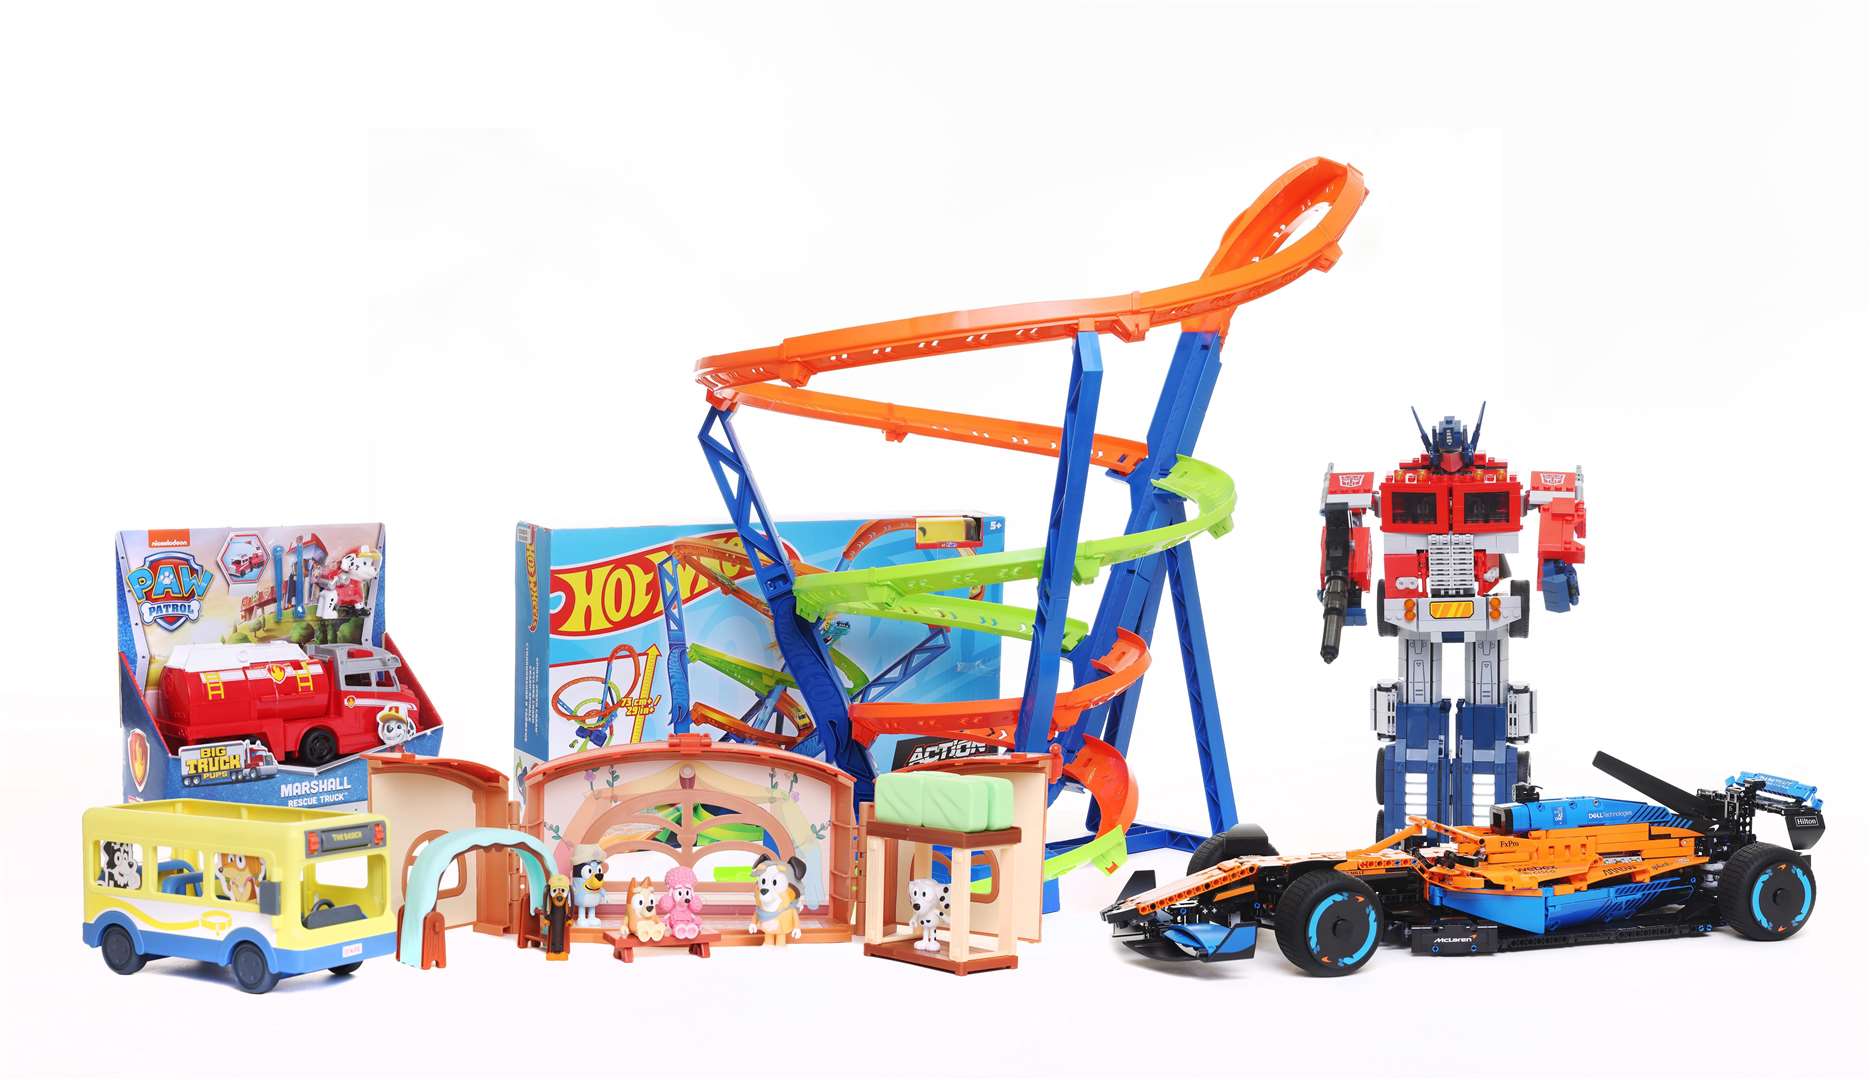 Hot wheels, Bluey and Transformers all feature in the list. Picture: Argos.